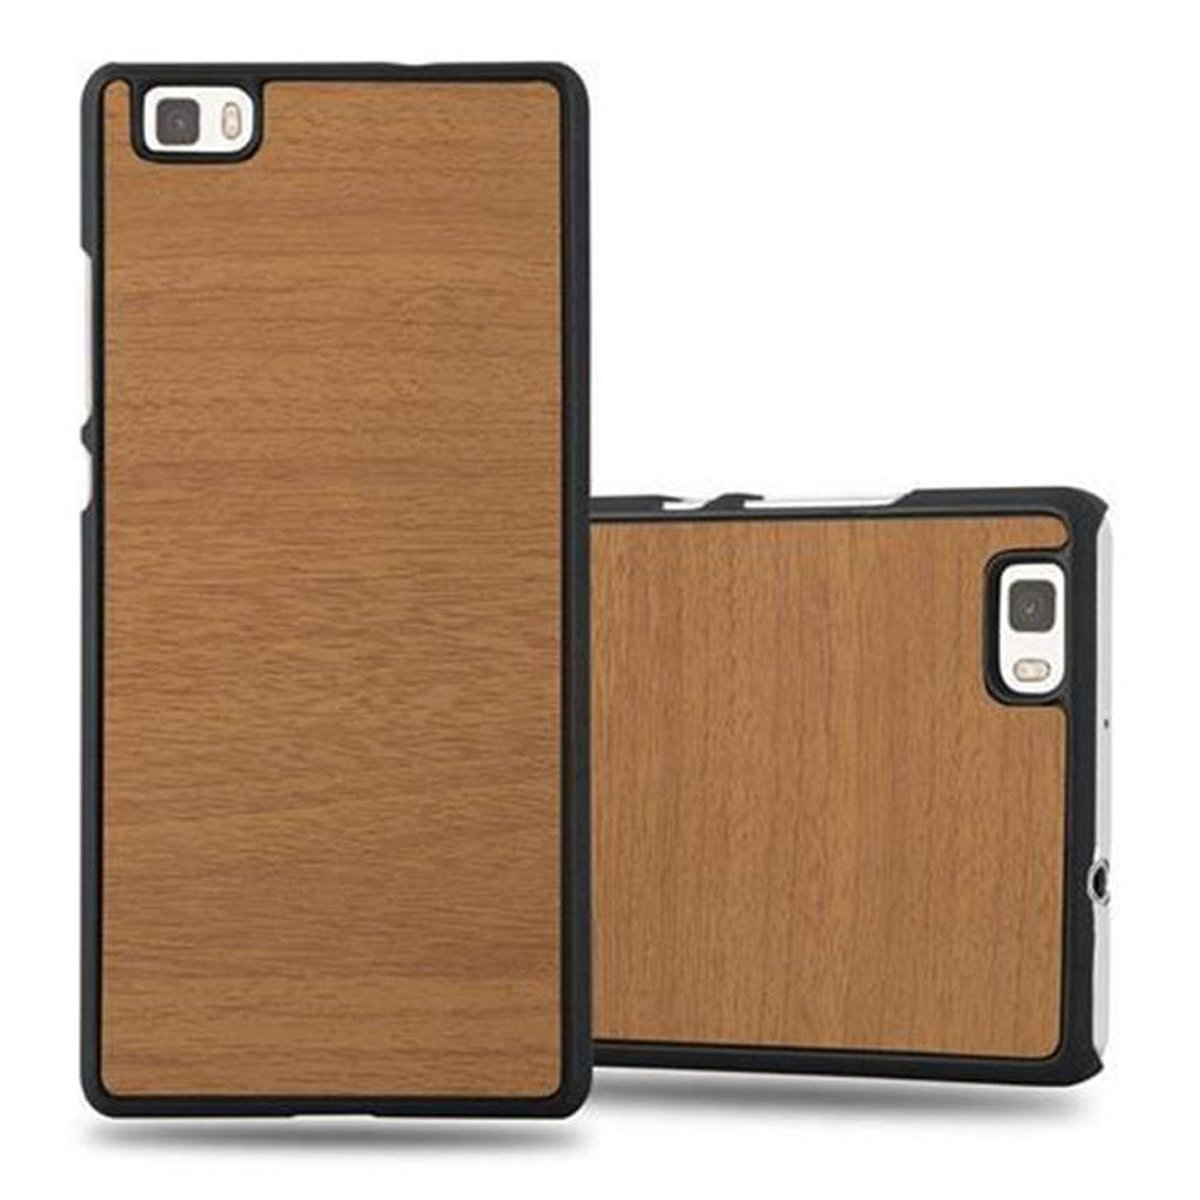 P8 Woody Hard WOODY CADORABO LITE Hülle 2015, Style, BRAUN Case Backcover, Huawei,